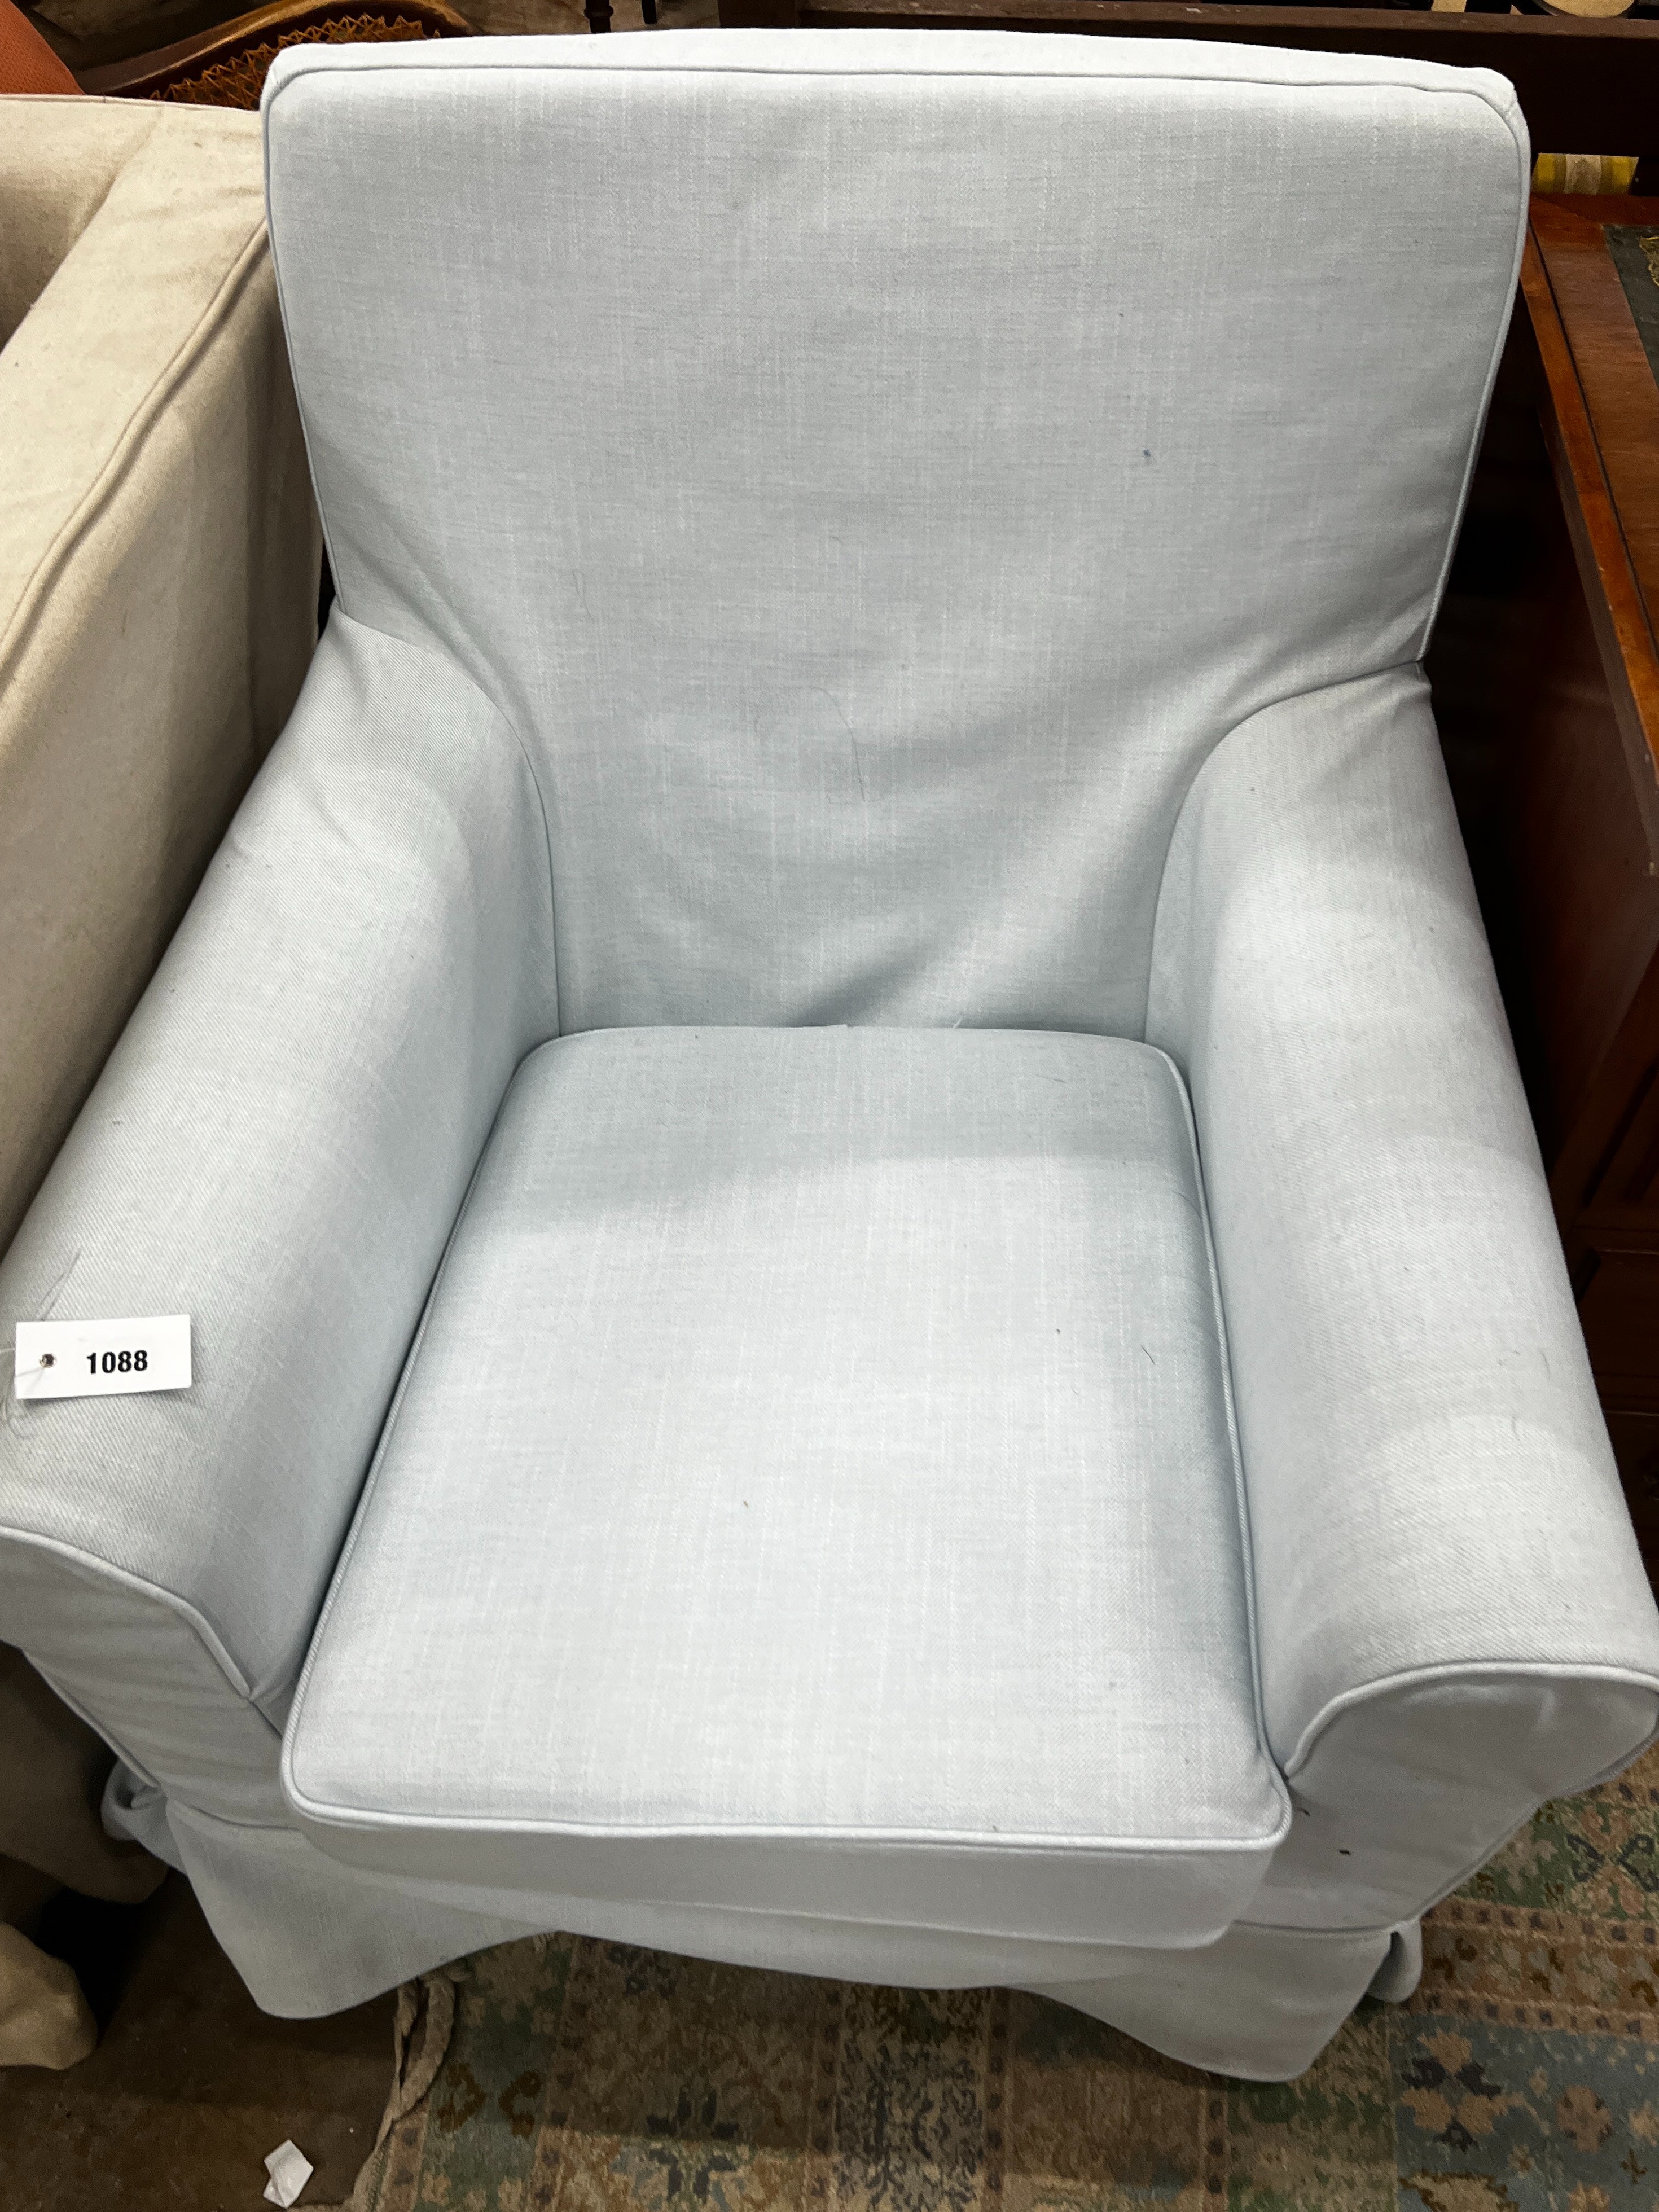 A Laura Ashley armchair upholstered in a pale blue fabric, length 76cm, depth 65cm, height 86cm